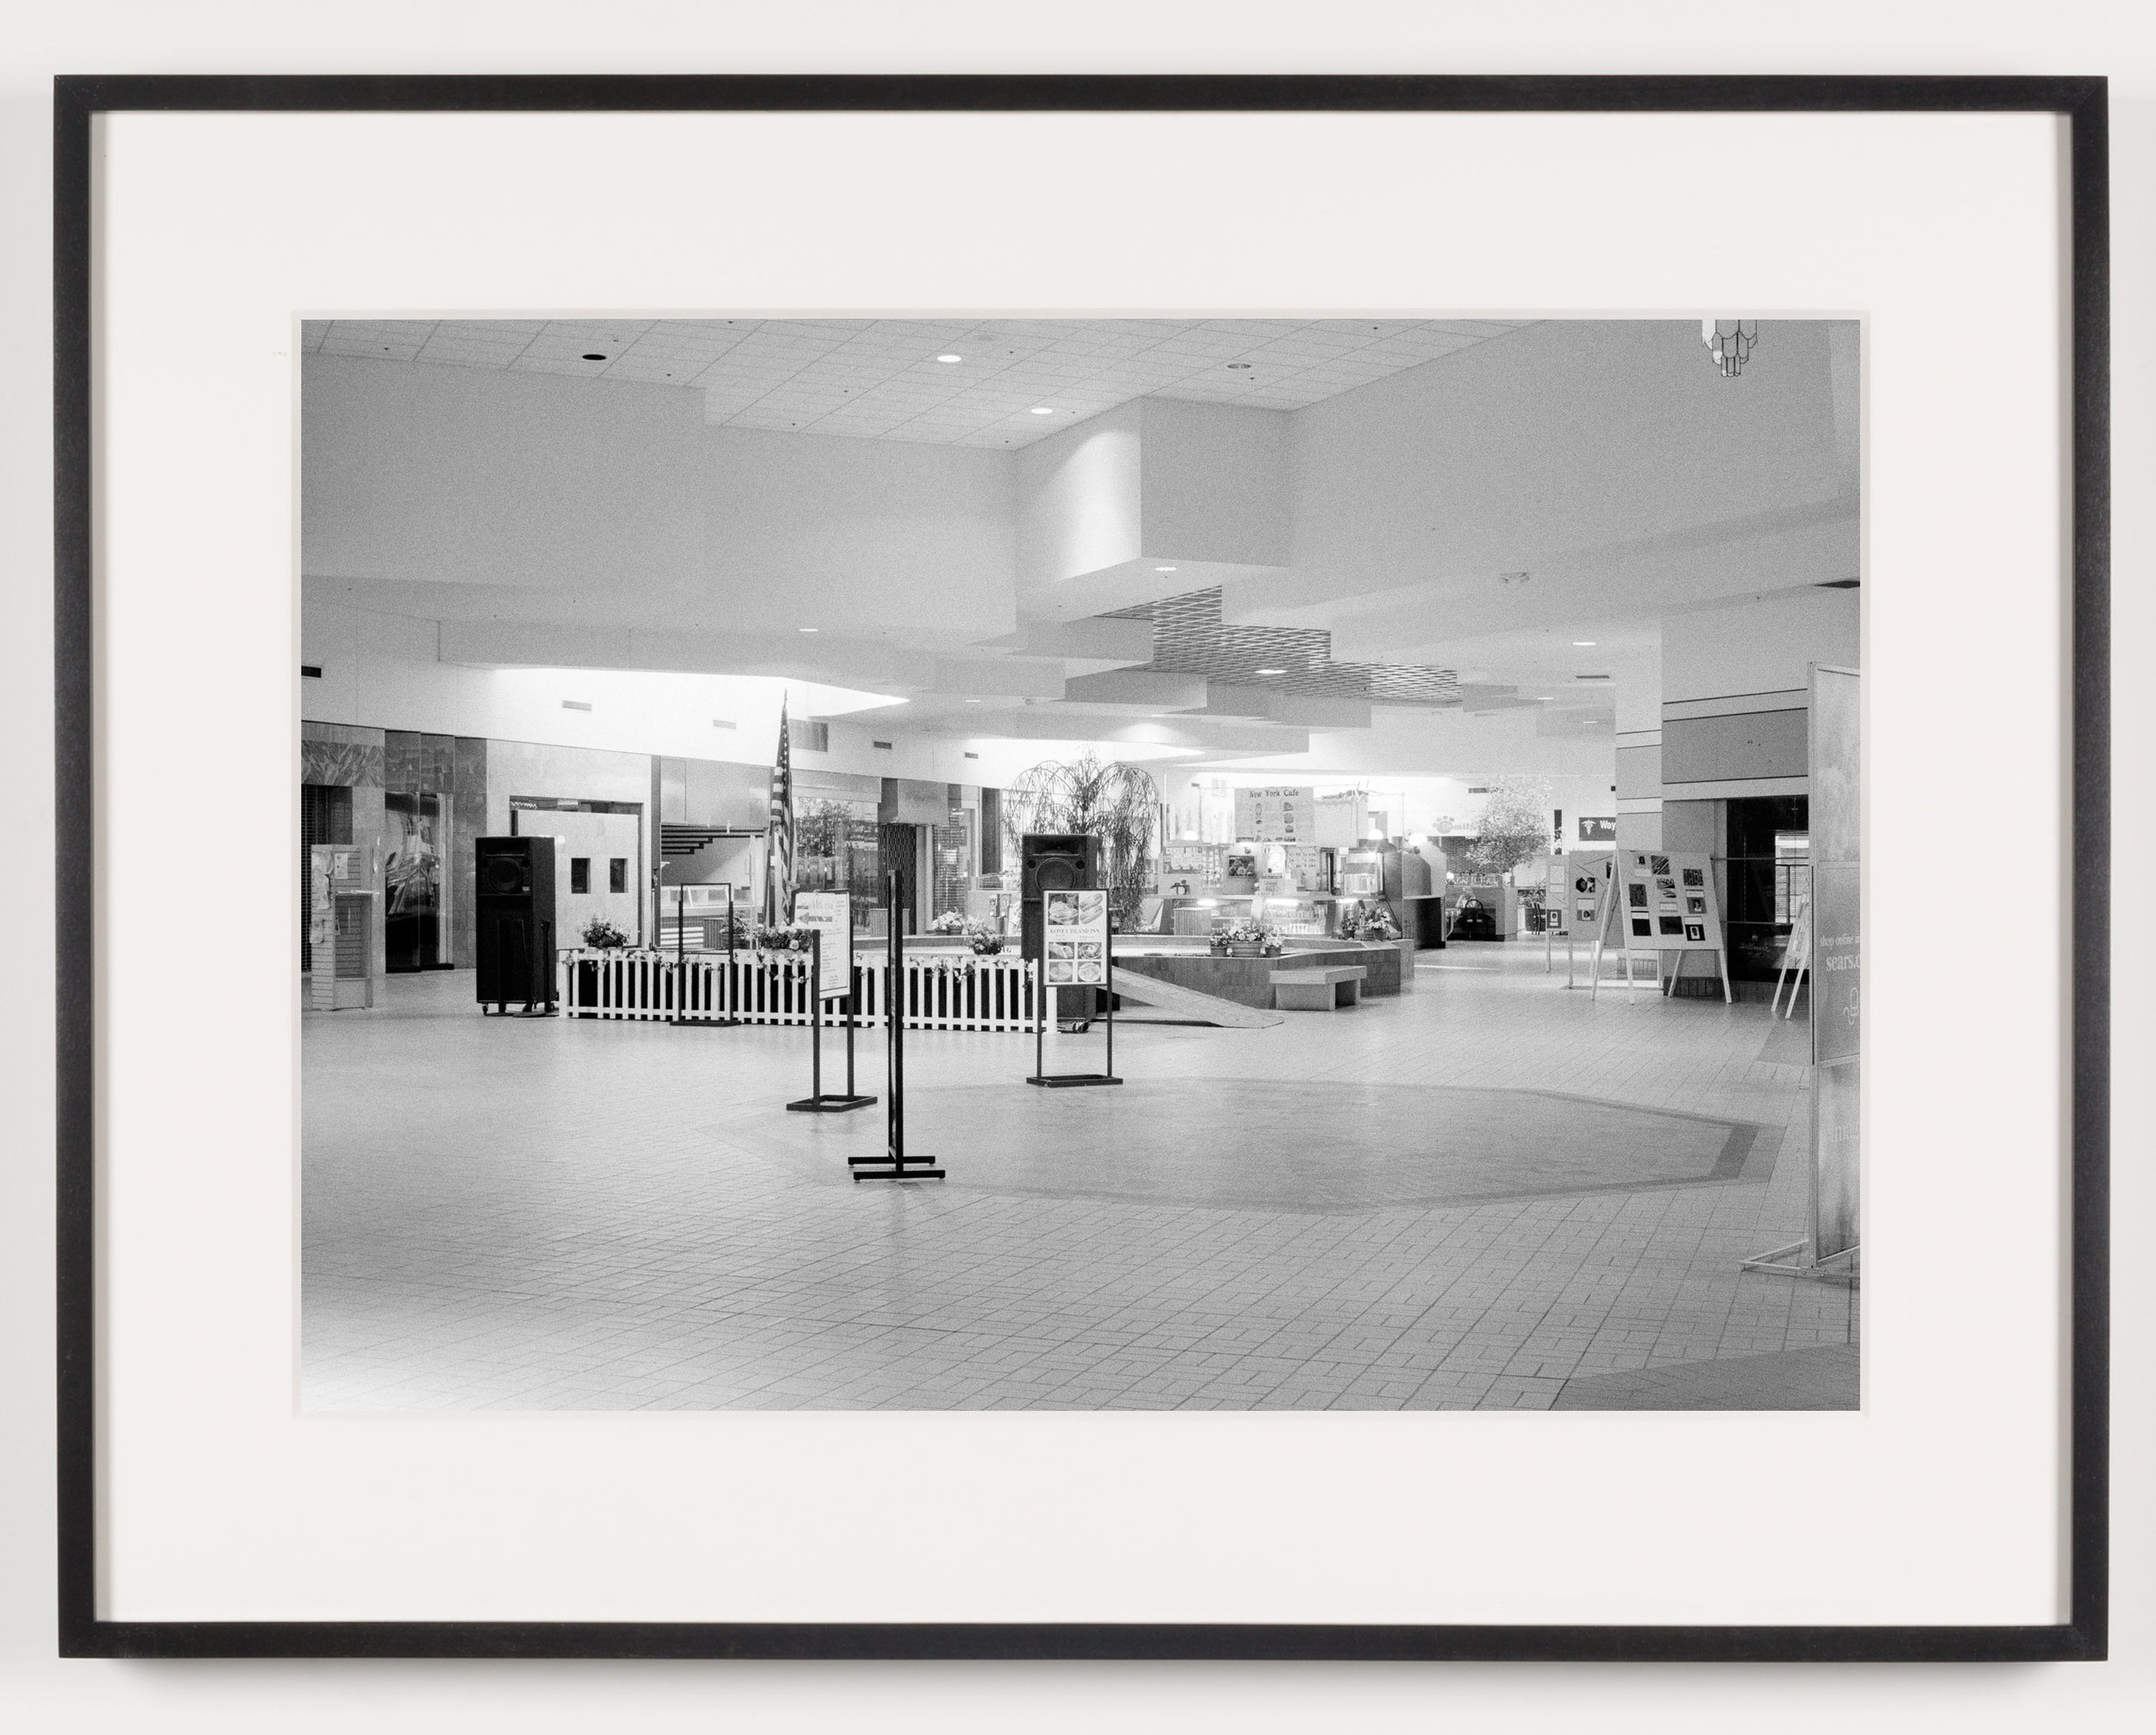   Livonia Mall (View of Community Stage), Livonia, MI. Est. 1964, Demo. 2008   2011  Epson Ultrachrome K3 archival ink jet print on Hahnemühle Photo Rag paper  21 5/8 x 28 1/8 inches   American Passages, 2001–2011    A Diagram of Forces, 2011     